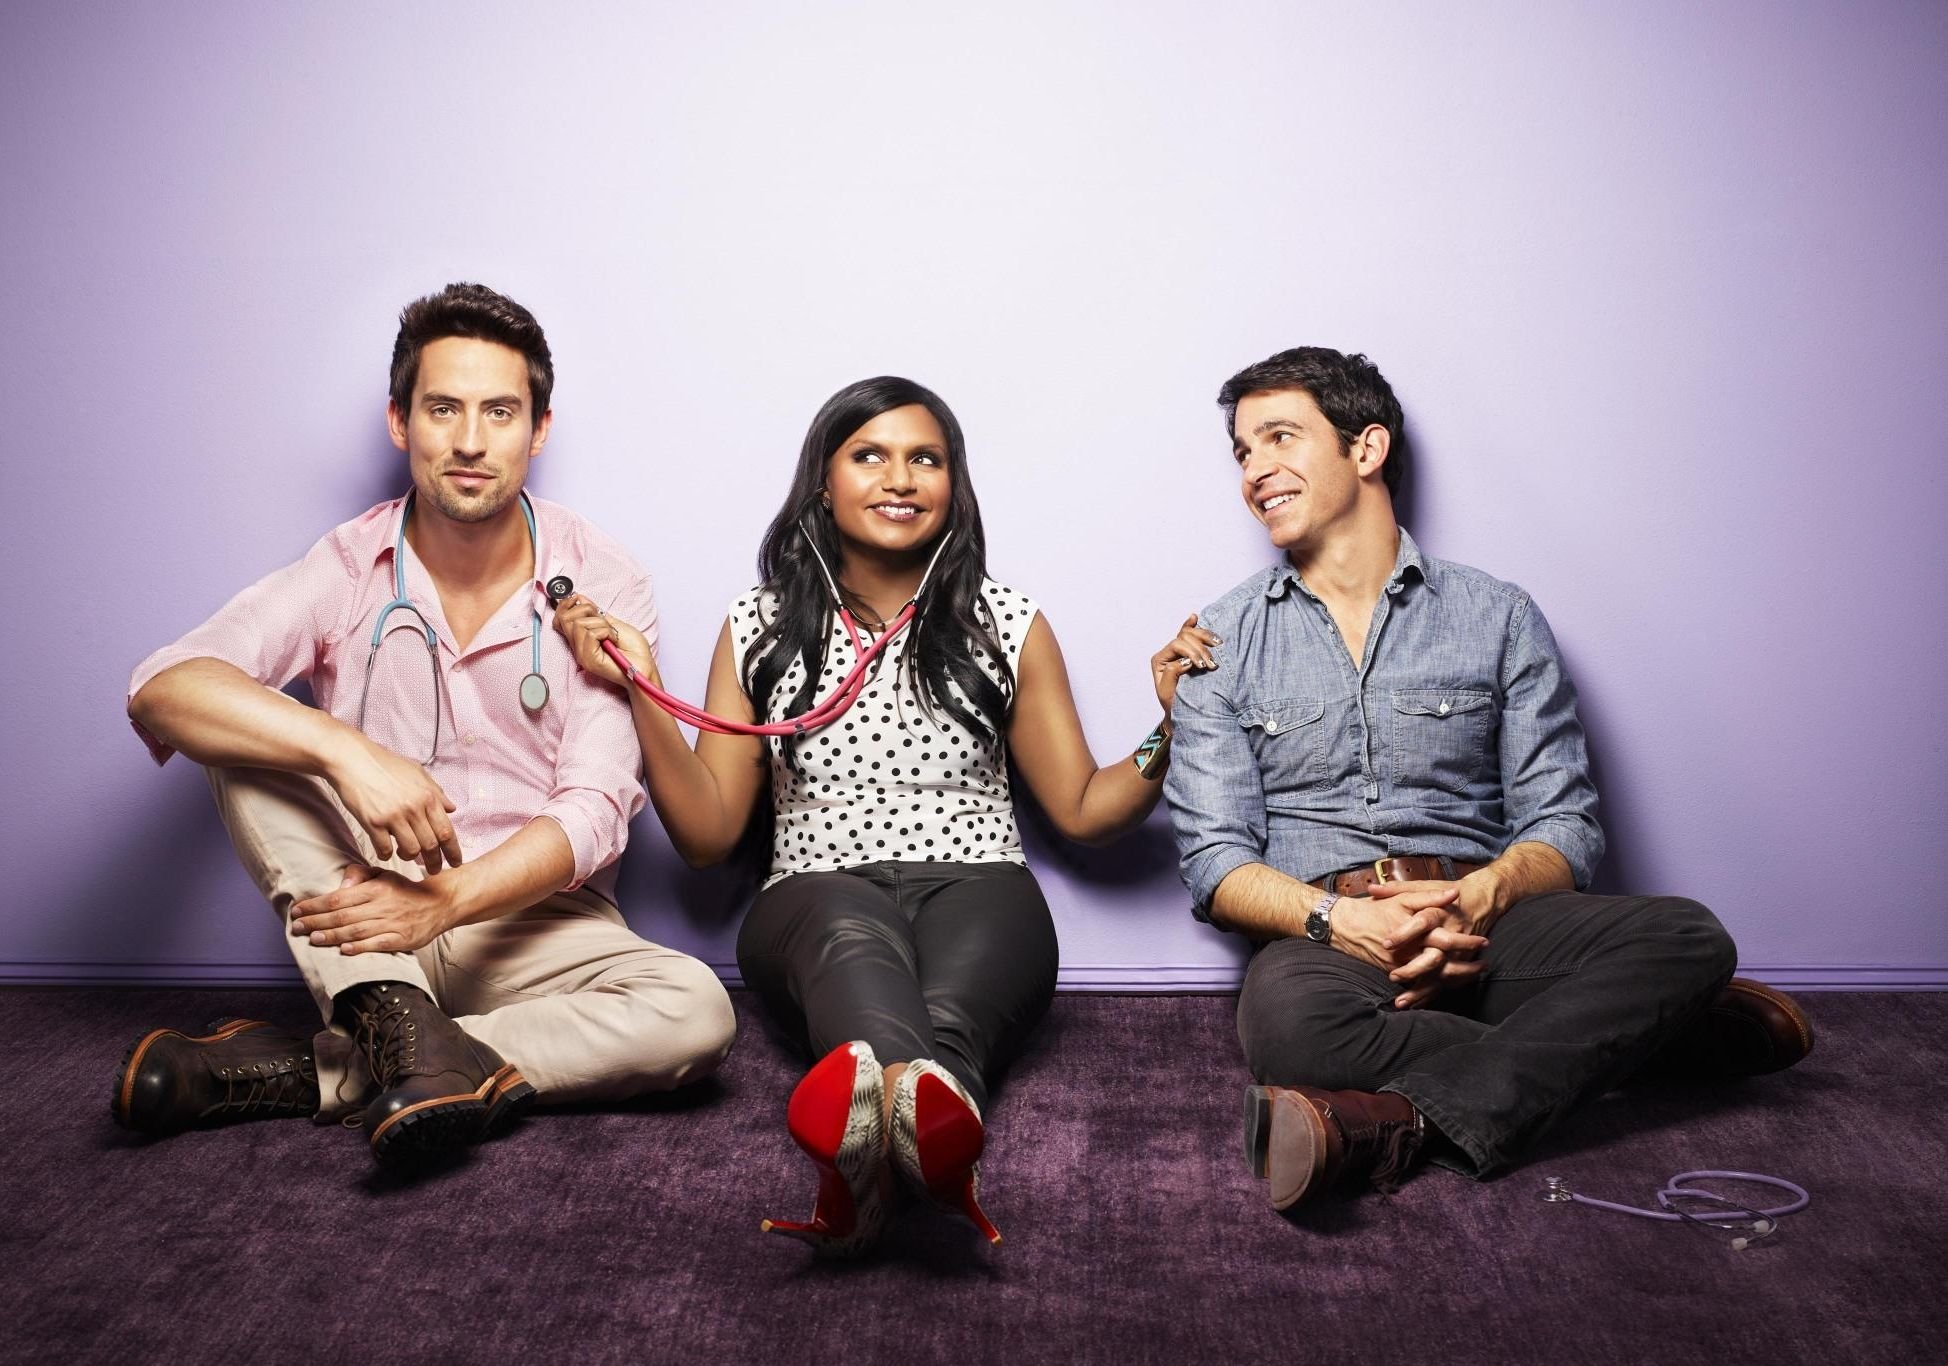 the, Mindy, Project, Comedy, Sitcom, Series, Medical, Romantic Wallpaper